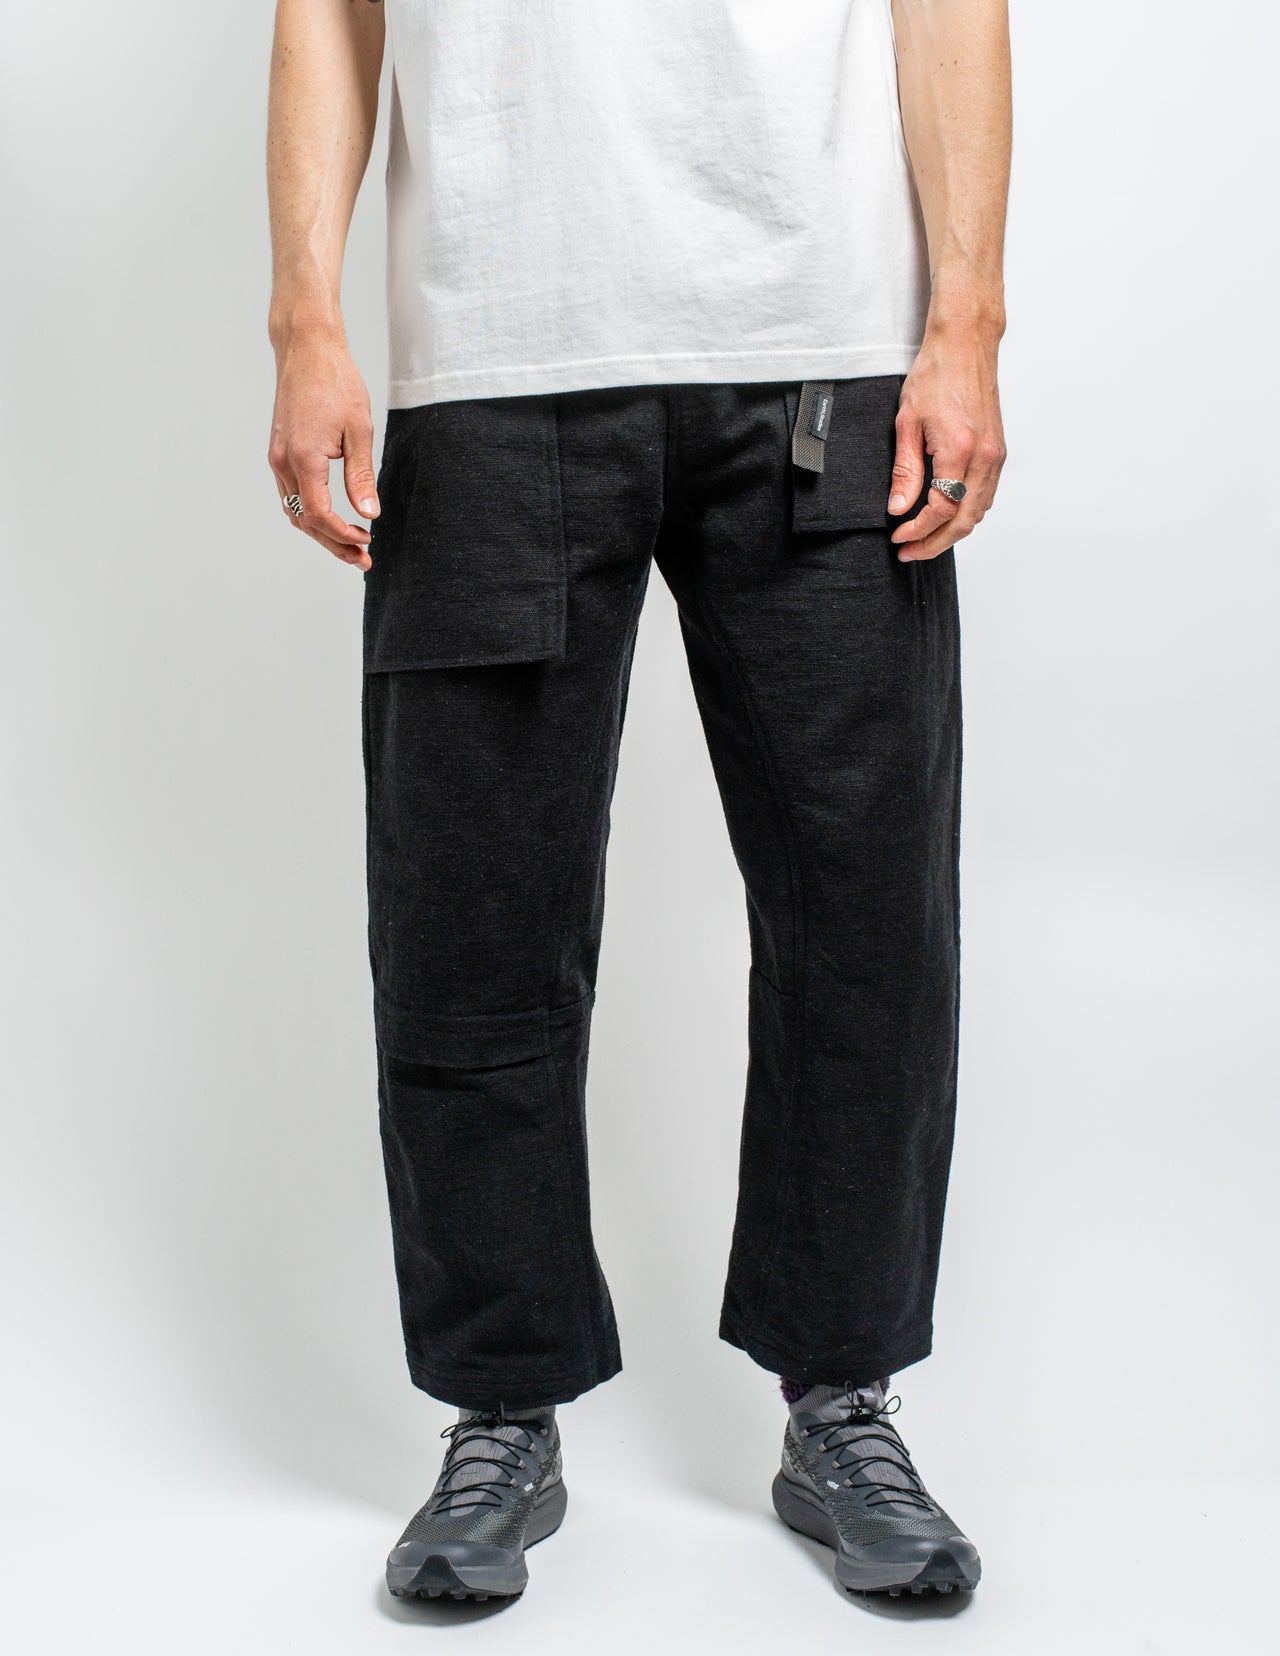 MP-103 Field Pant in Charcoal